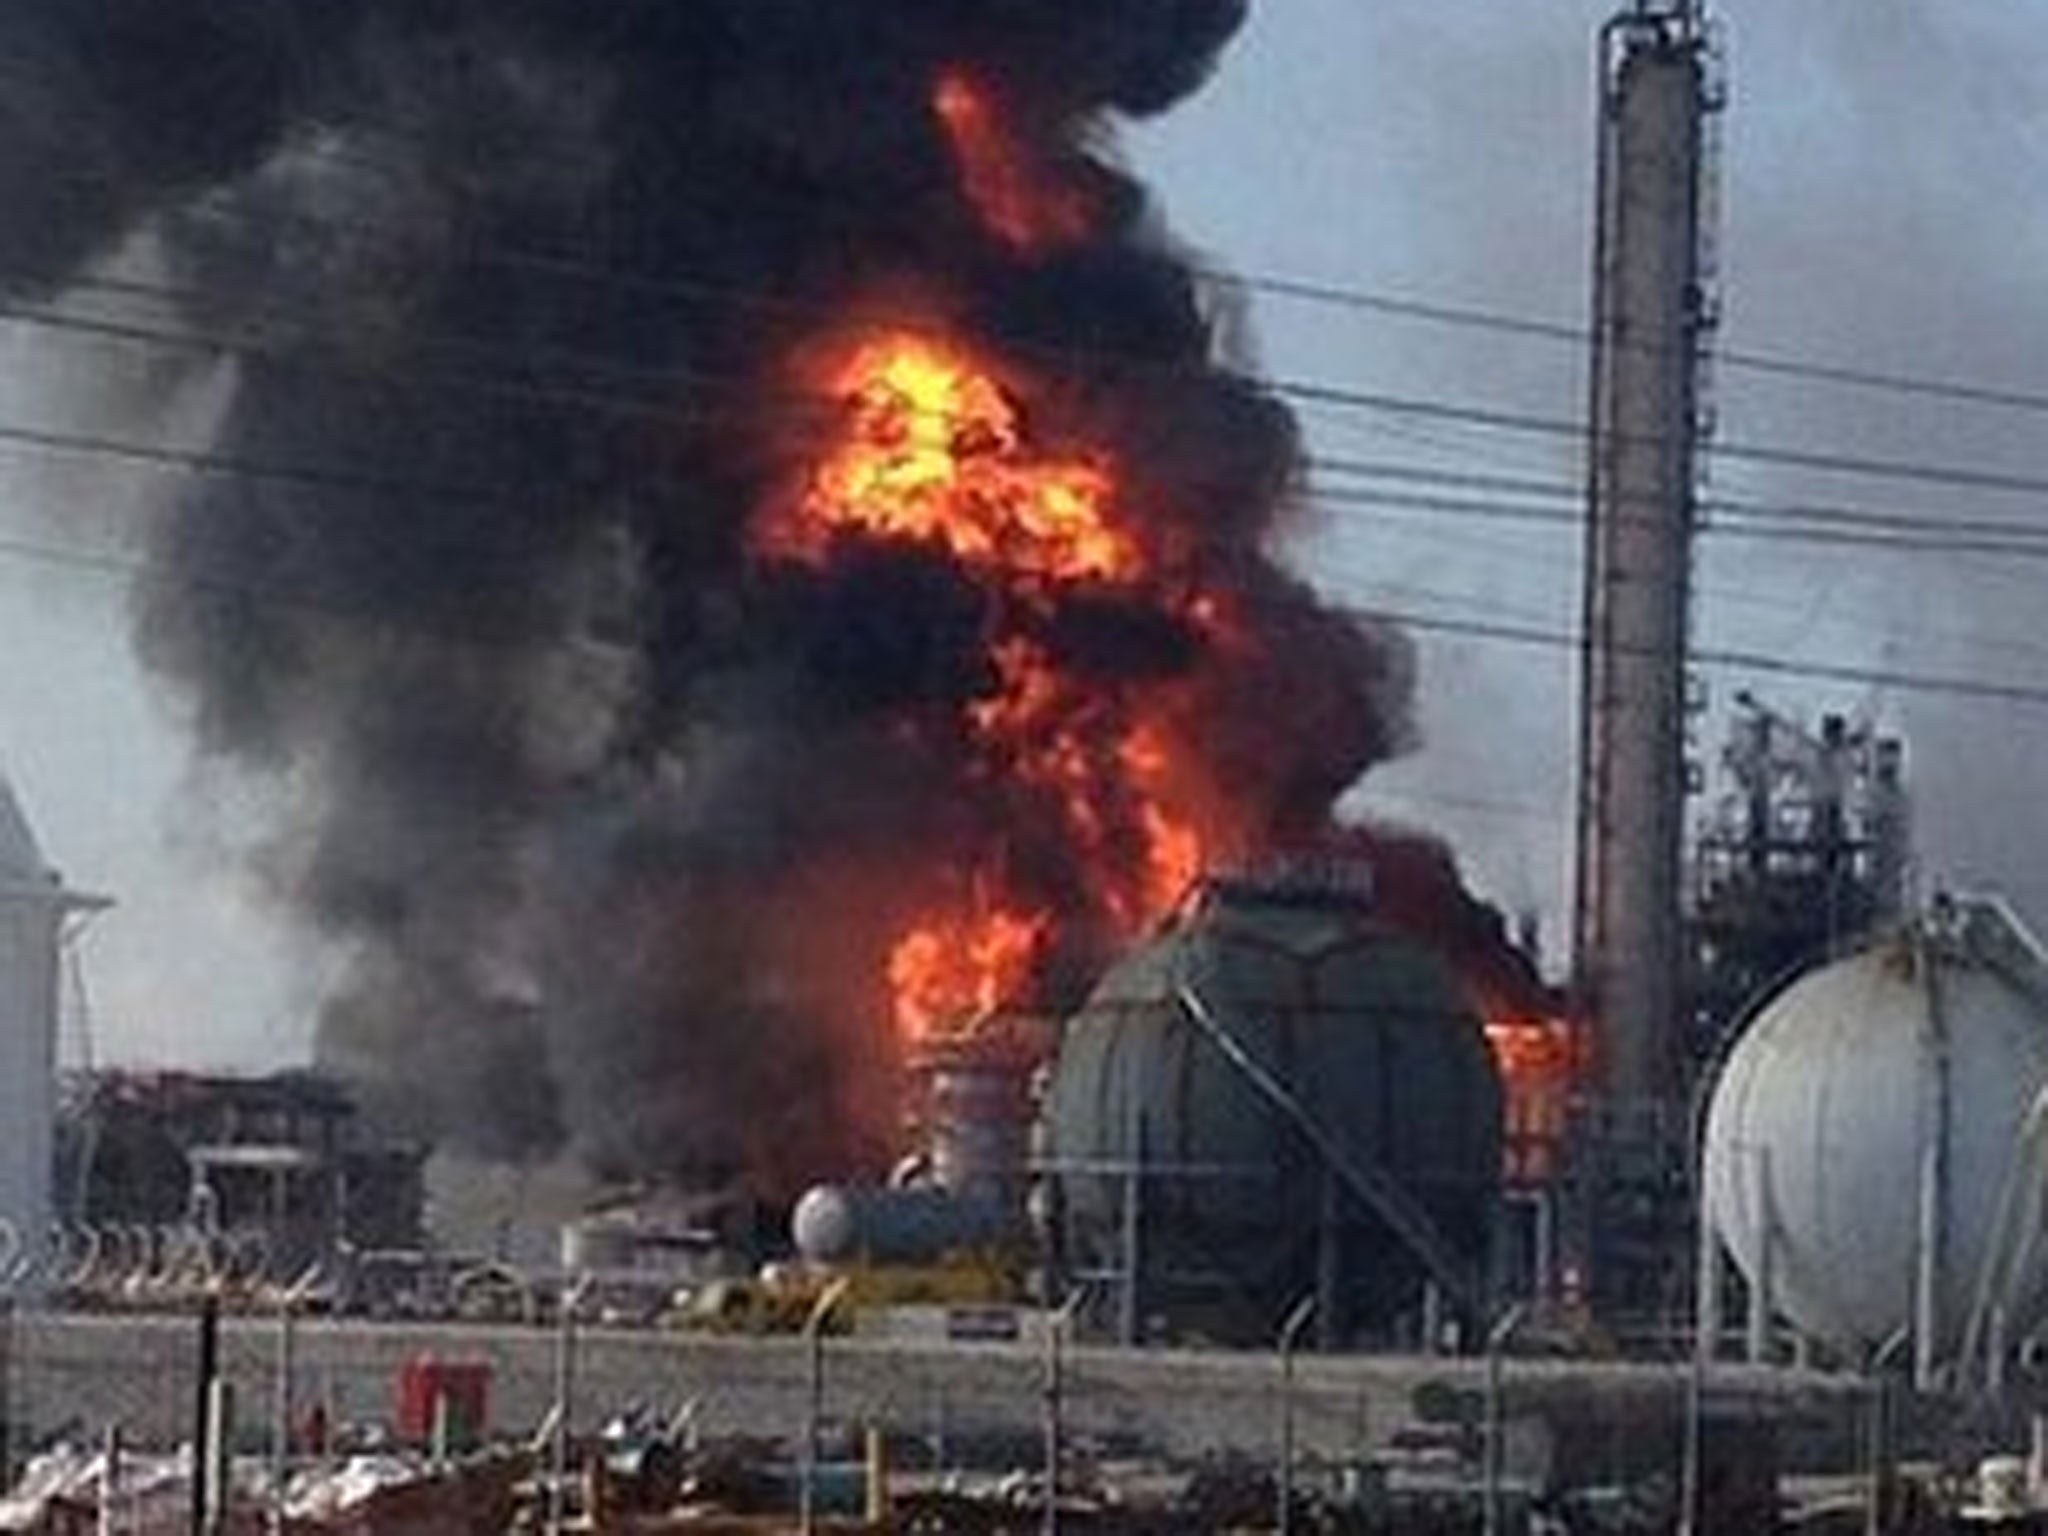 A large explosion and fire tore through a chemical plant in the US state of Louisiana today reportedly leaving at least 30 injured